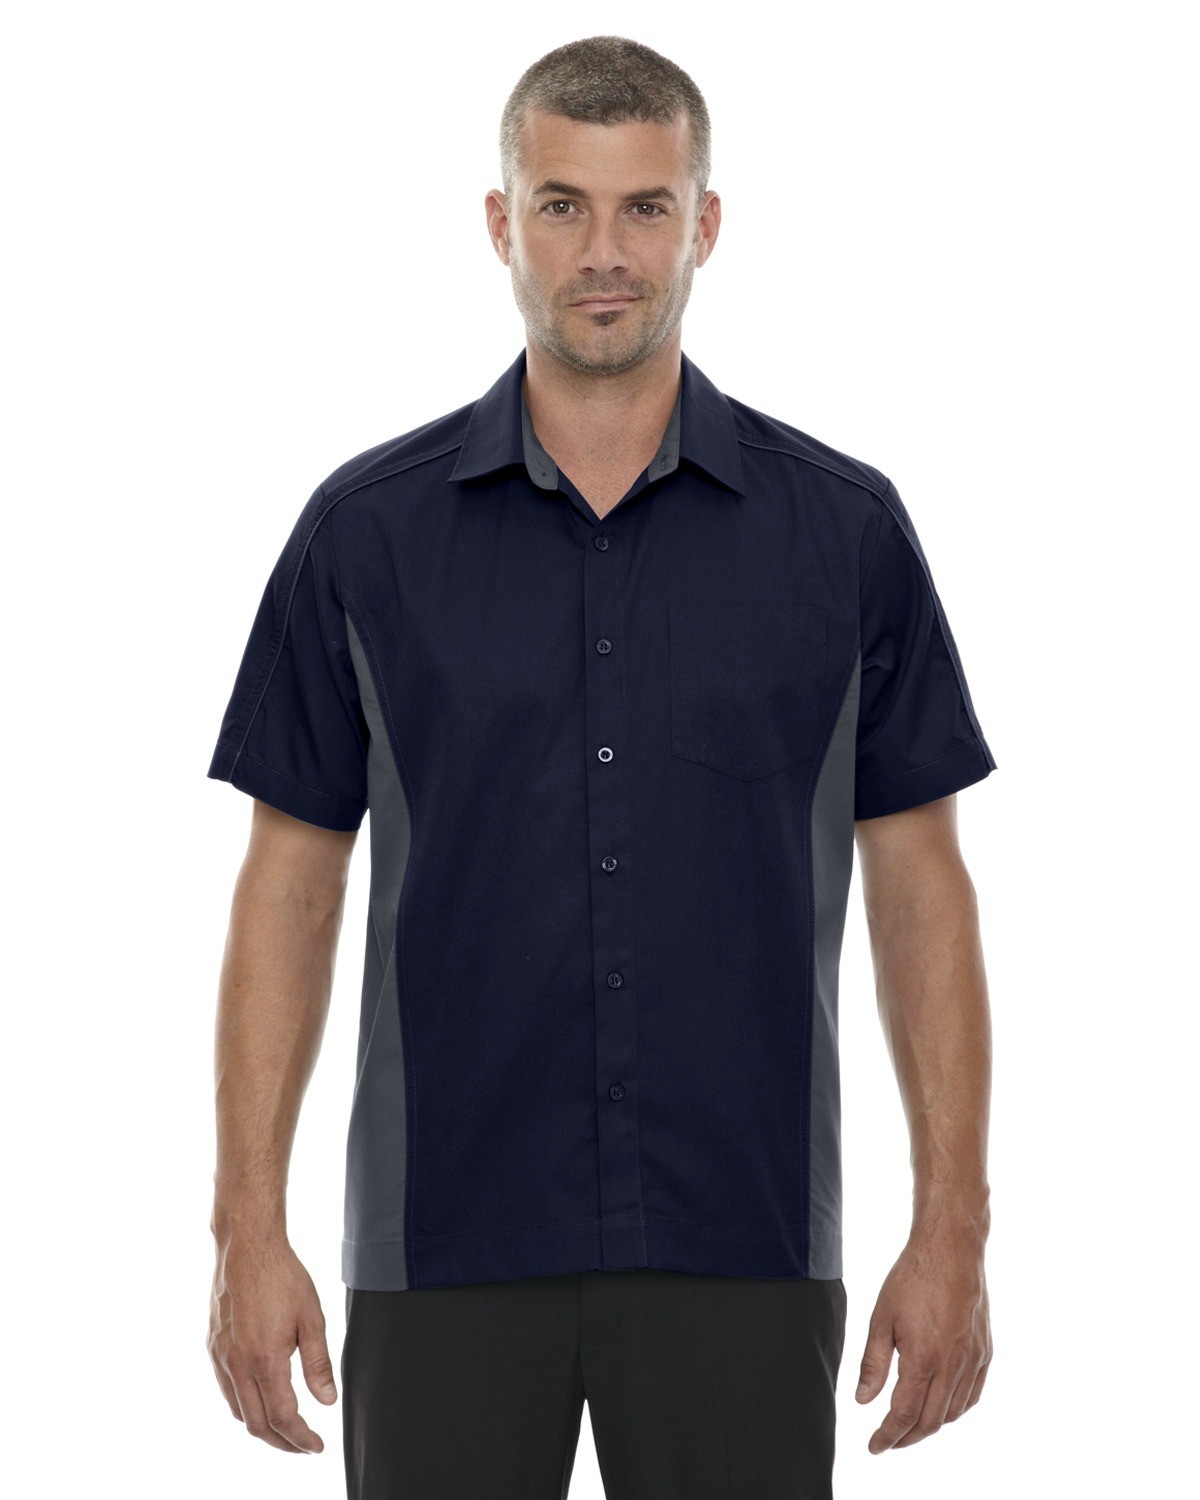 Ash City - North End 87042 Mens Short Sleeve UV Protection Fuse Colorblock Twill Shirt With Pocket